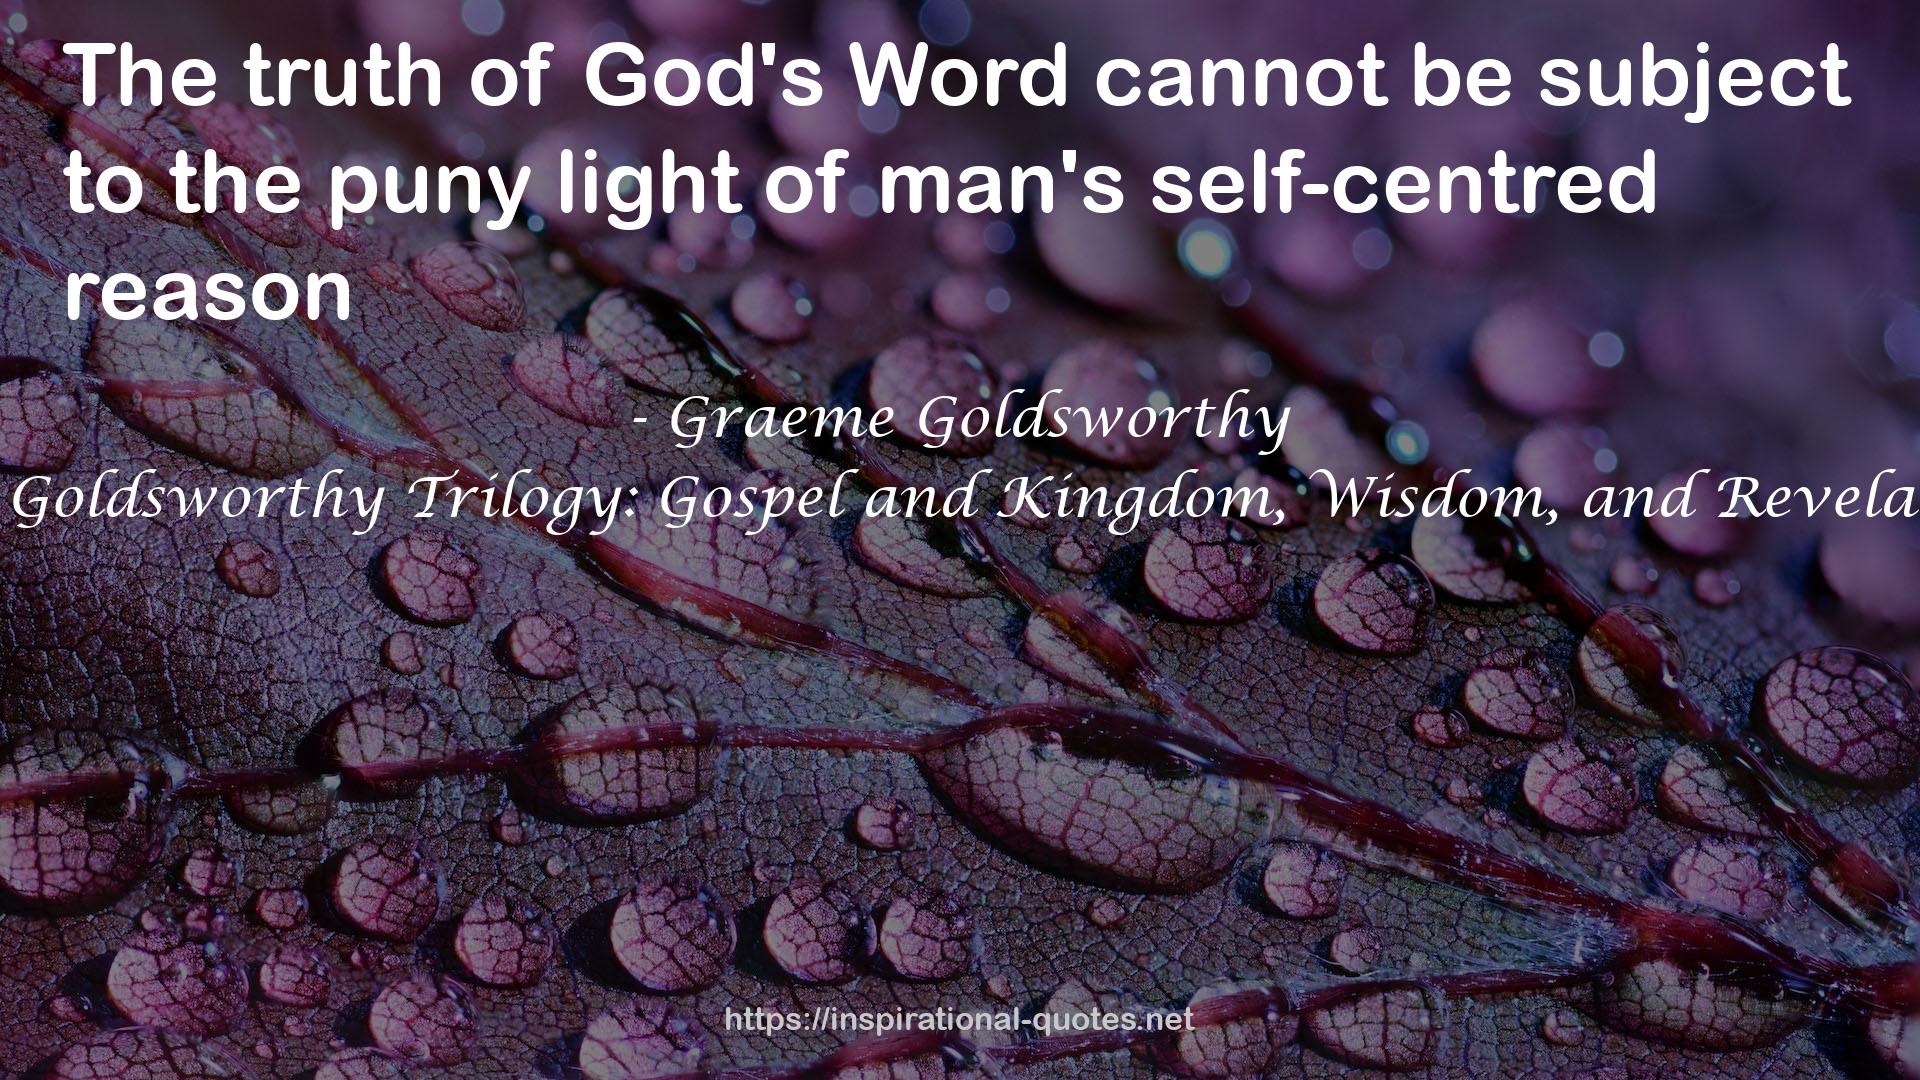 The Goldsworthy Trilogy: Gospel and Kingdom, Wisdom, and Revelation QUOTES